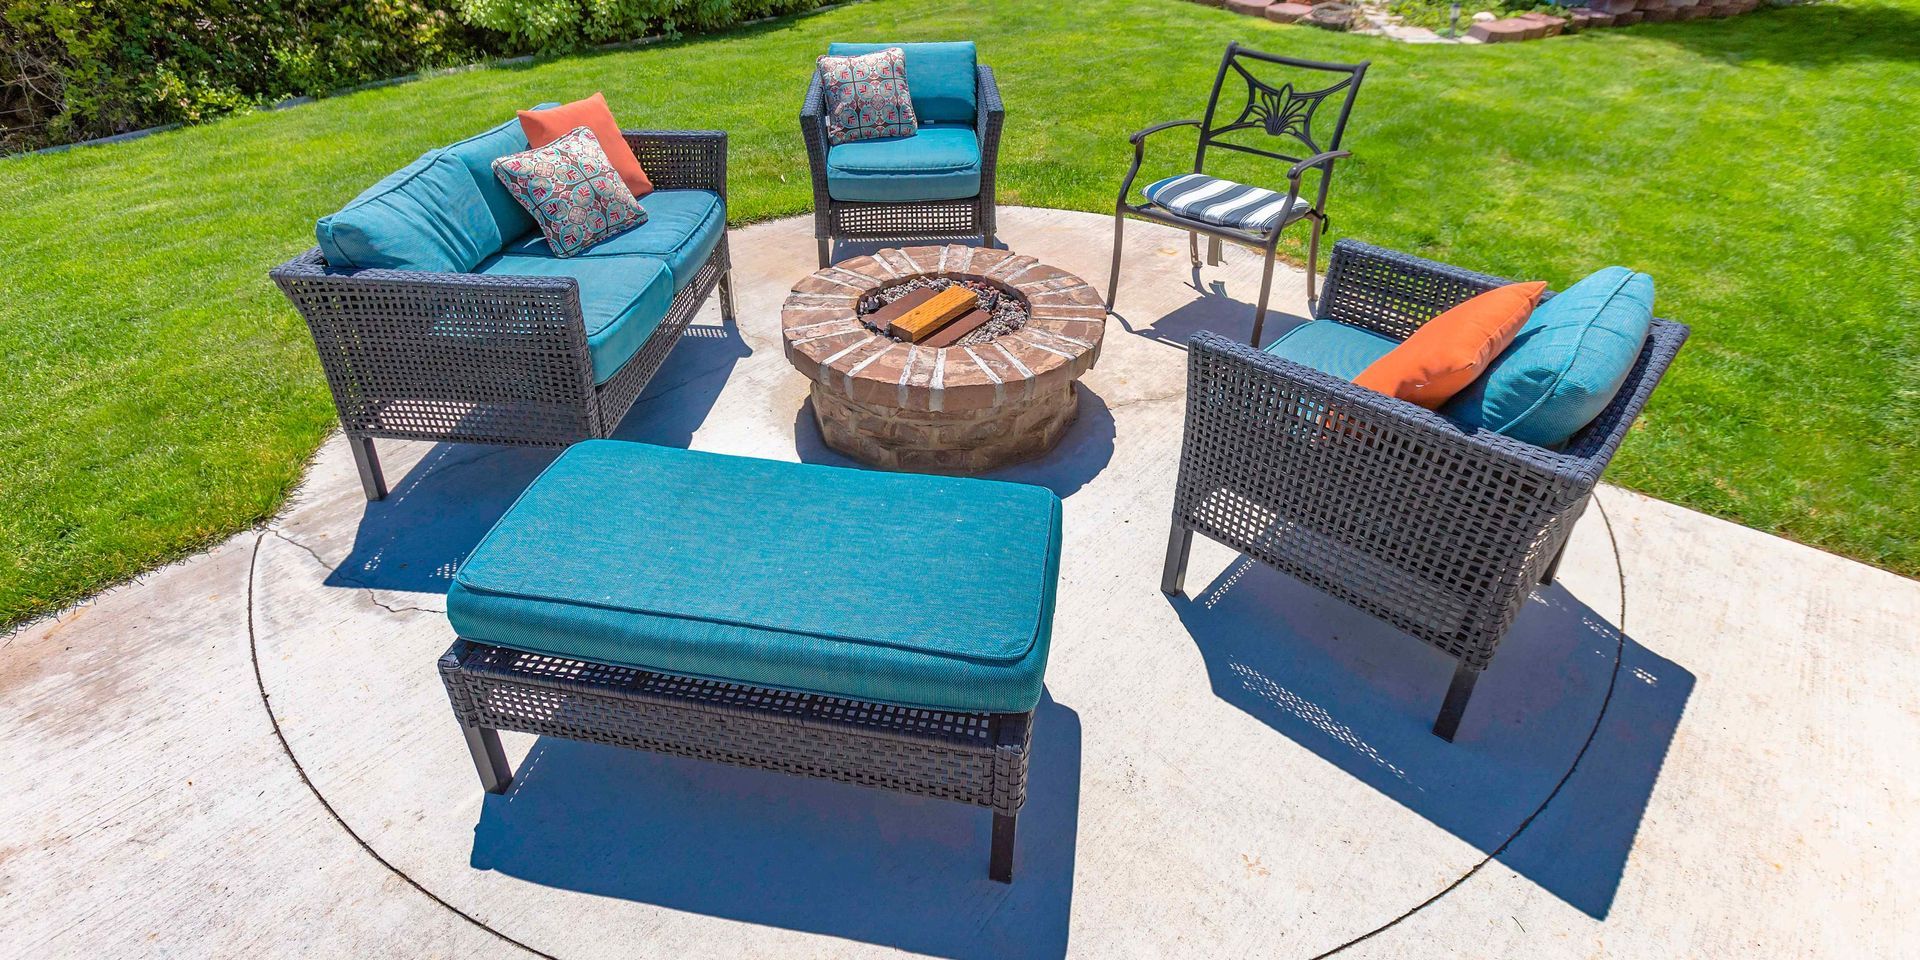 A bright and vibrant stone firepit in summer.